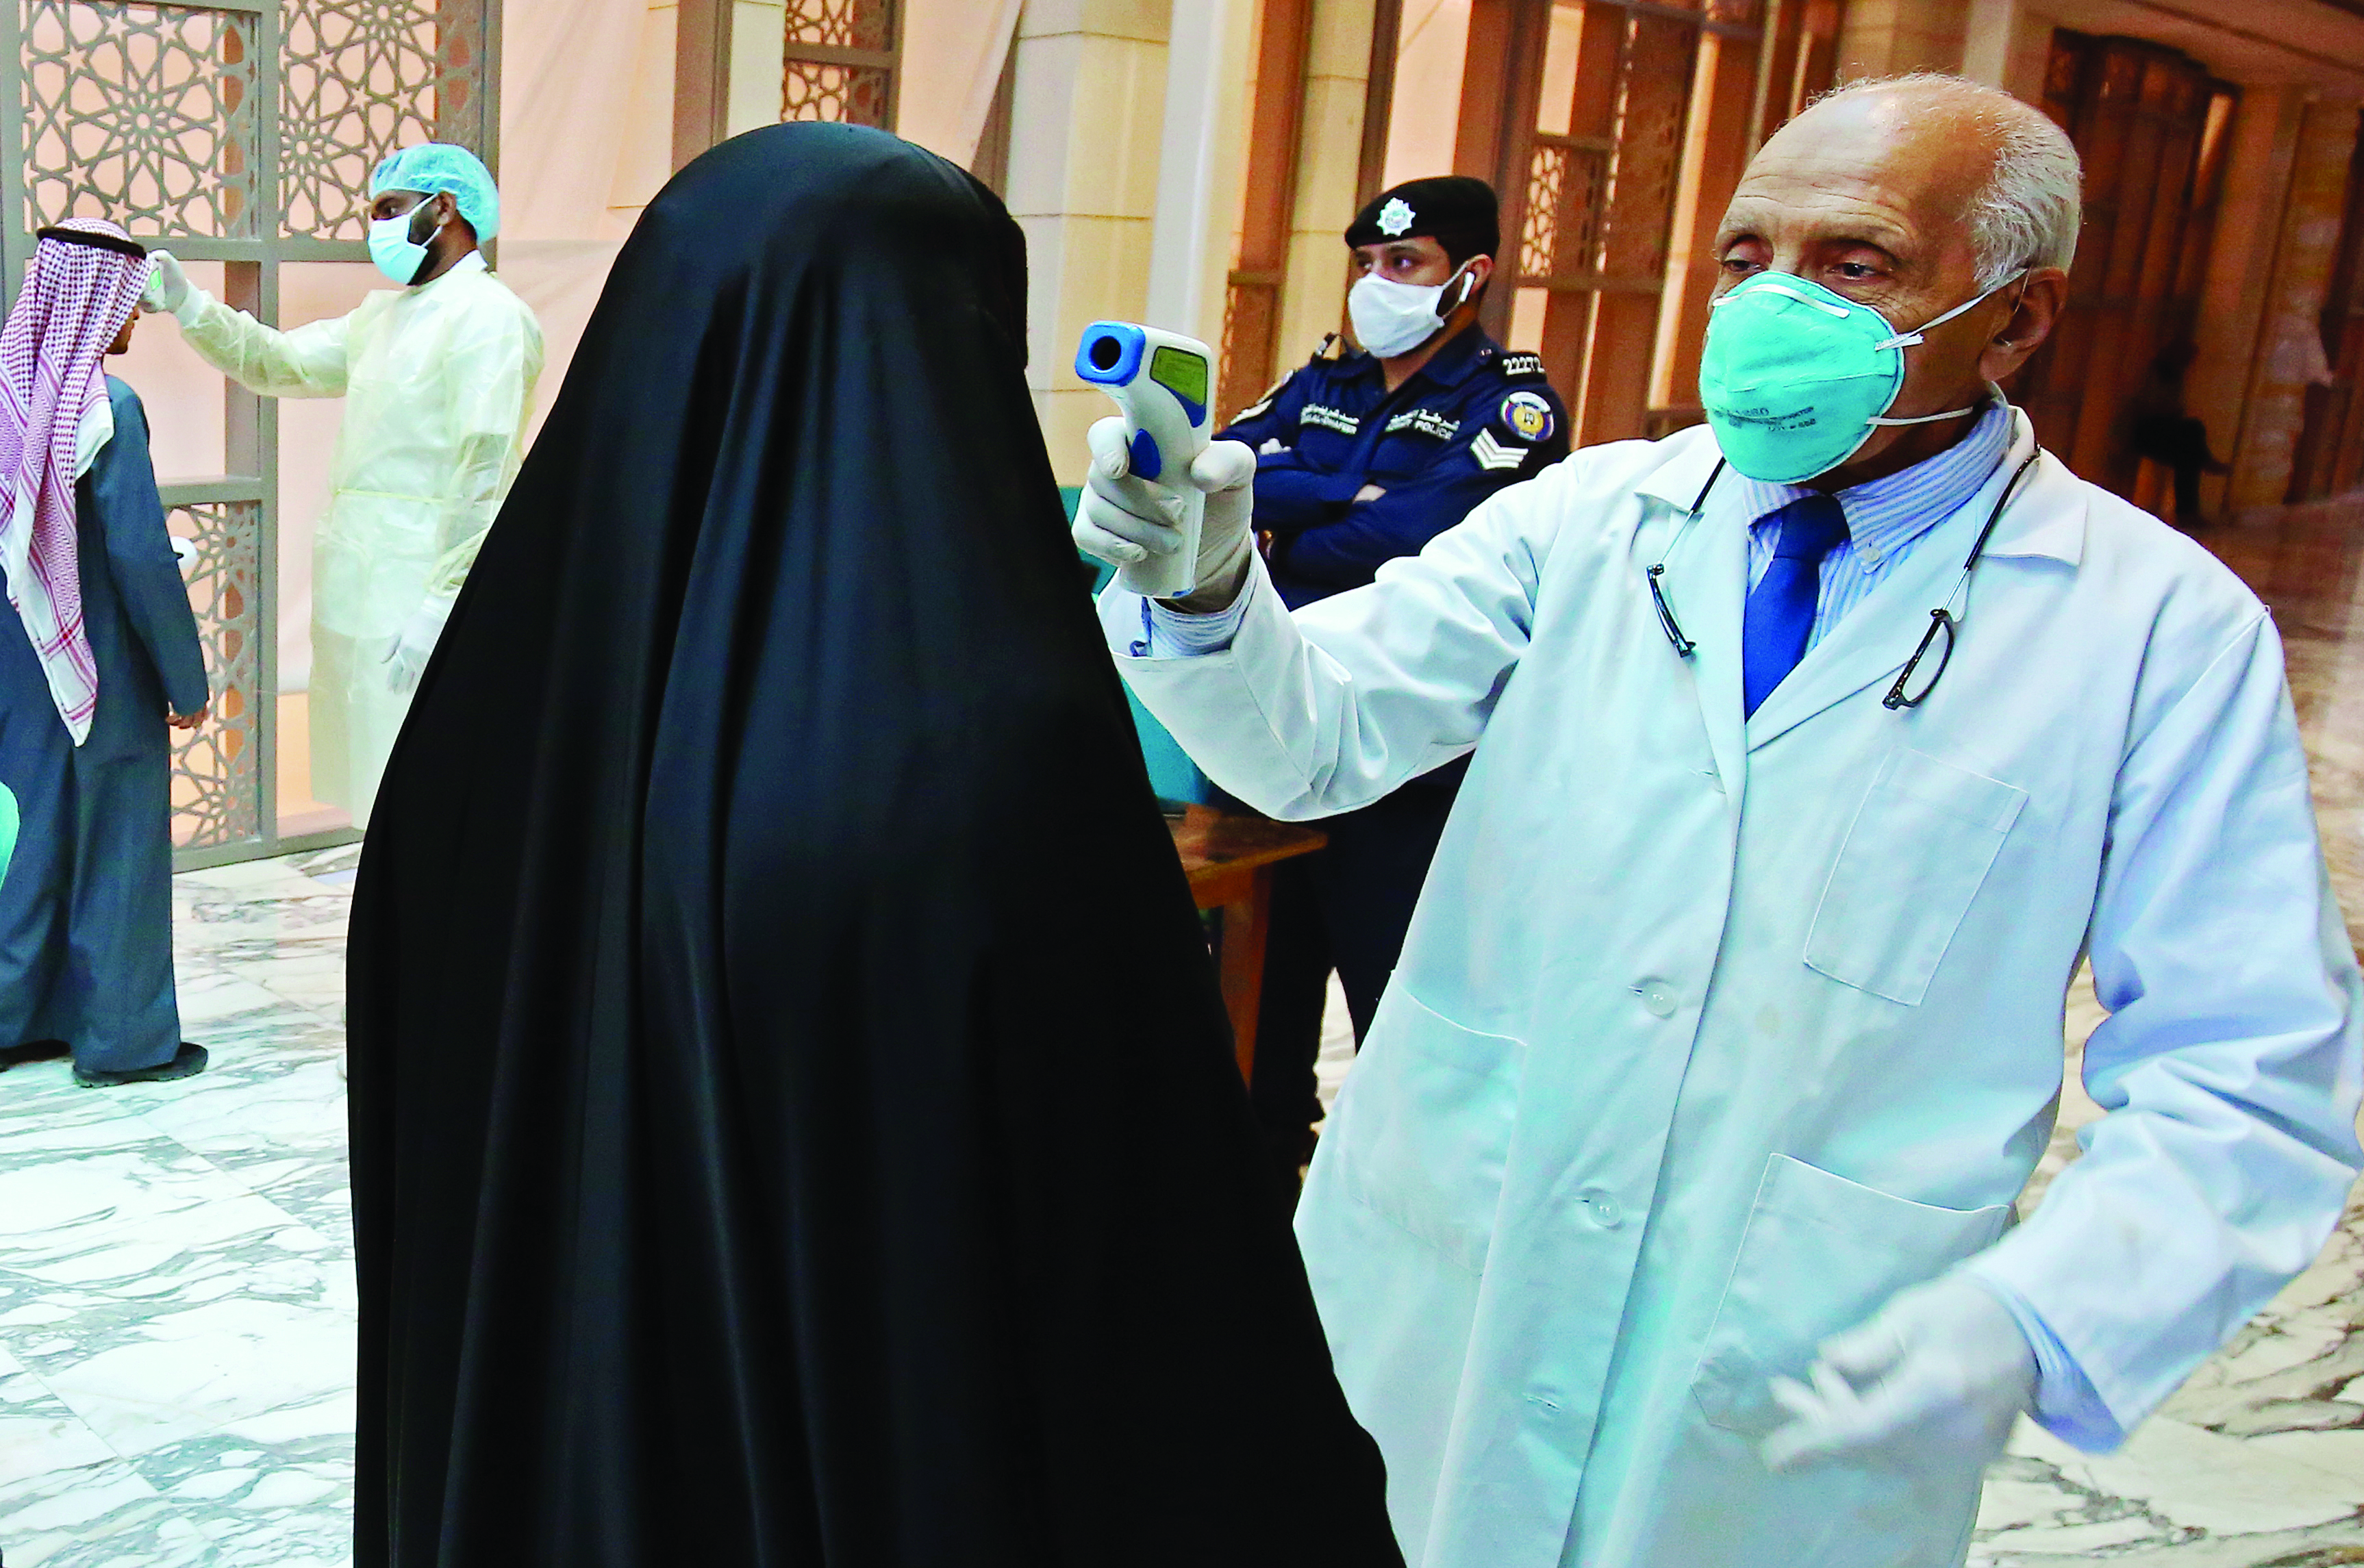 Kuwait health ministry workers scan employees and visitors of the ministries complex, as they arrive to their work, in Kuwait City on March 3, 2020.